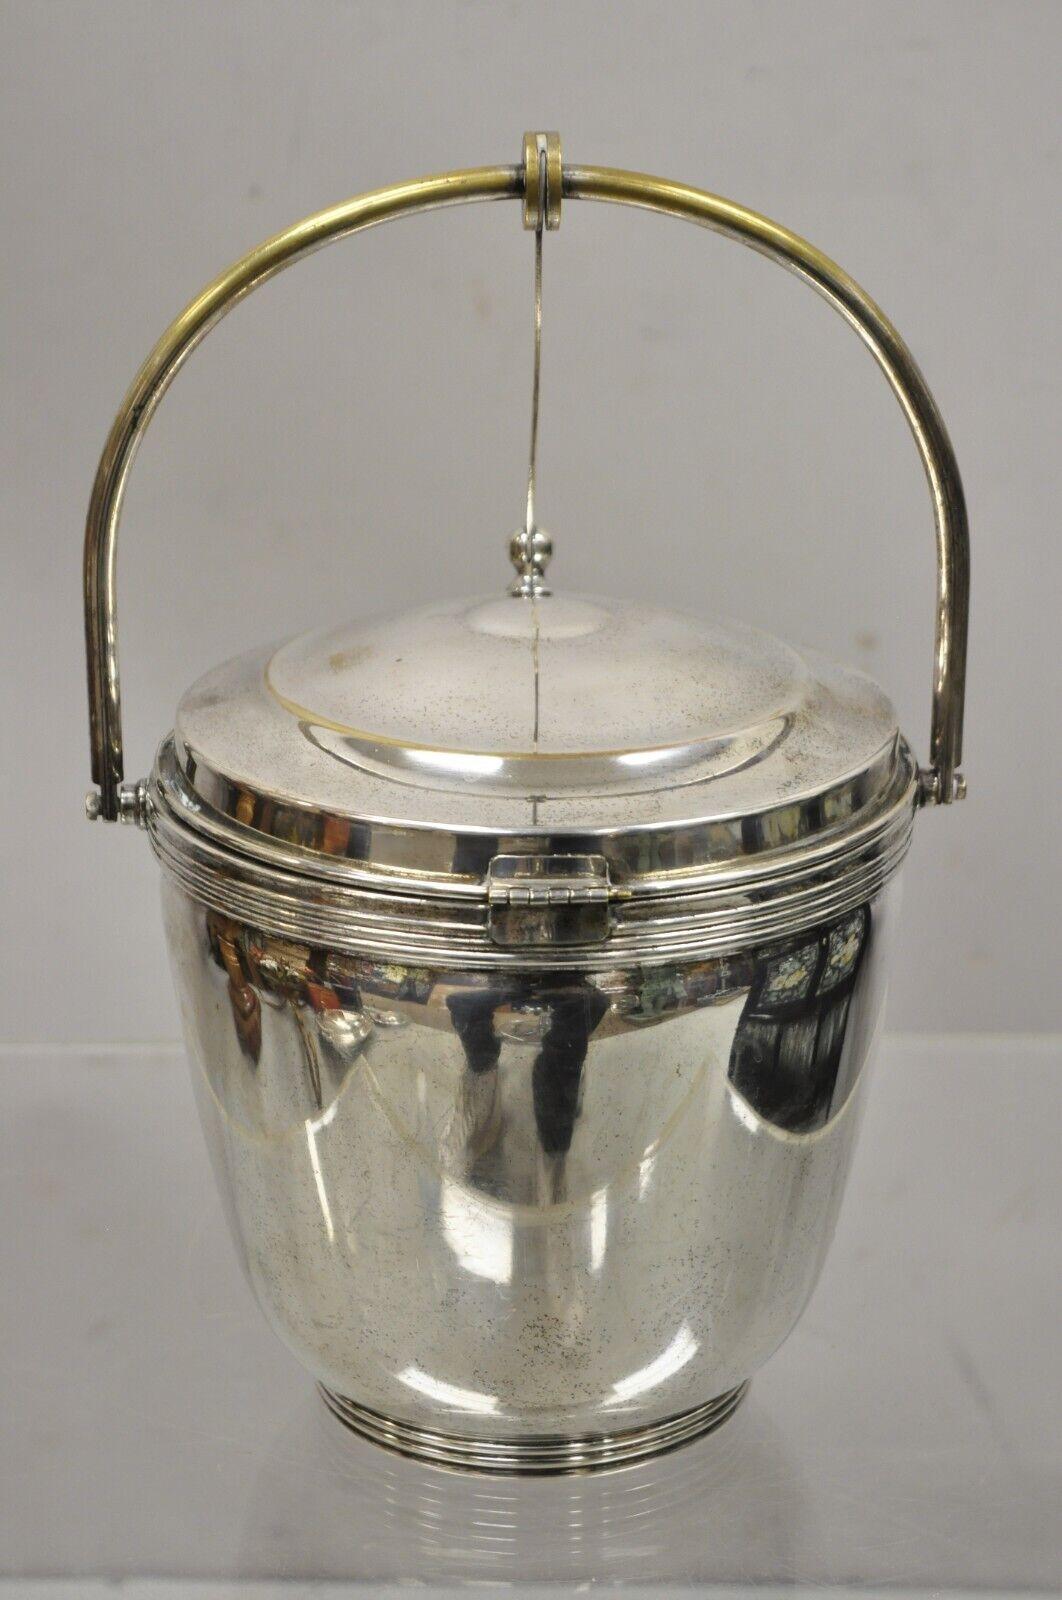 Vintage Sheffield Silver Co. Silver Plate Regency Style Reticulating Hinge Ice Bucket. Item features a white milk glass liner, reticulating hinge lid, original stamp, very nice vintage item, clean modernist lines, great style and form. Circa Mid